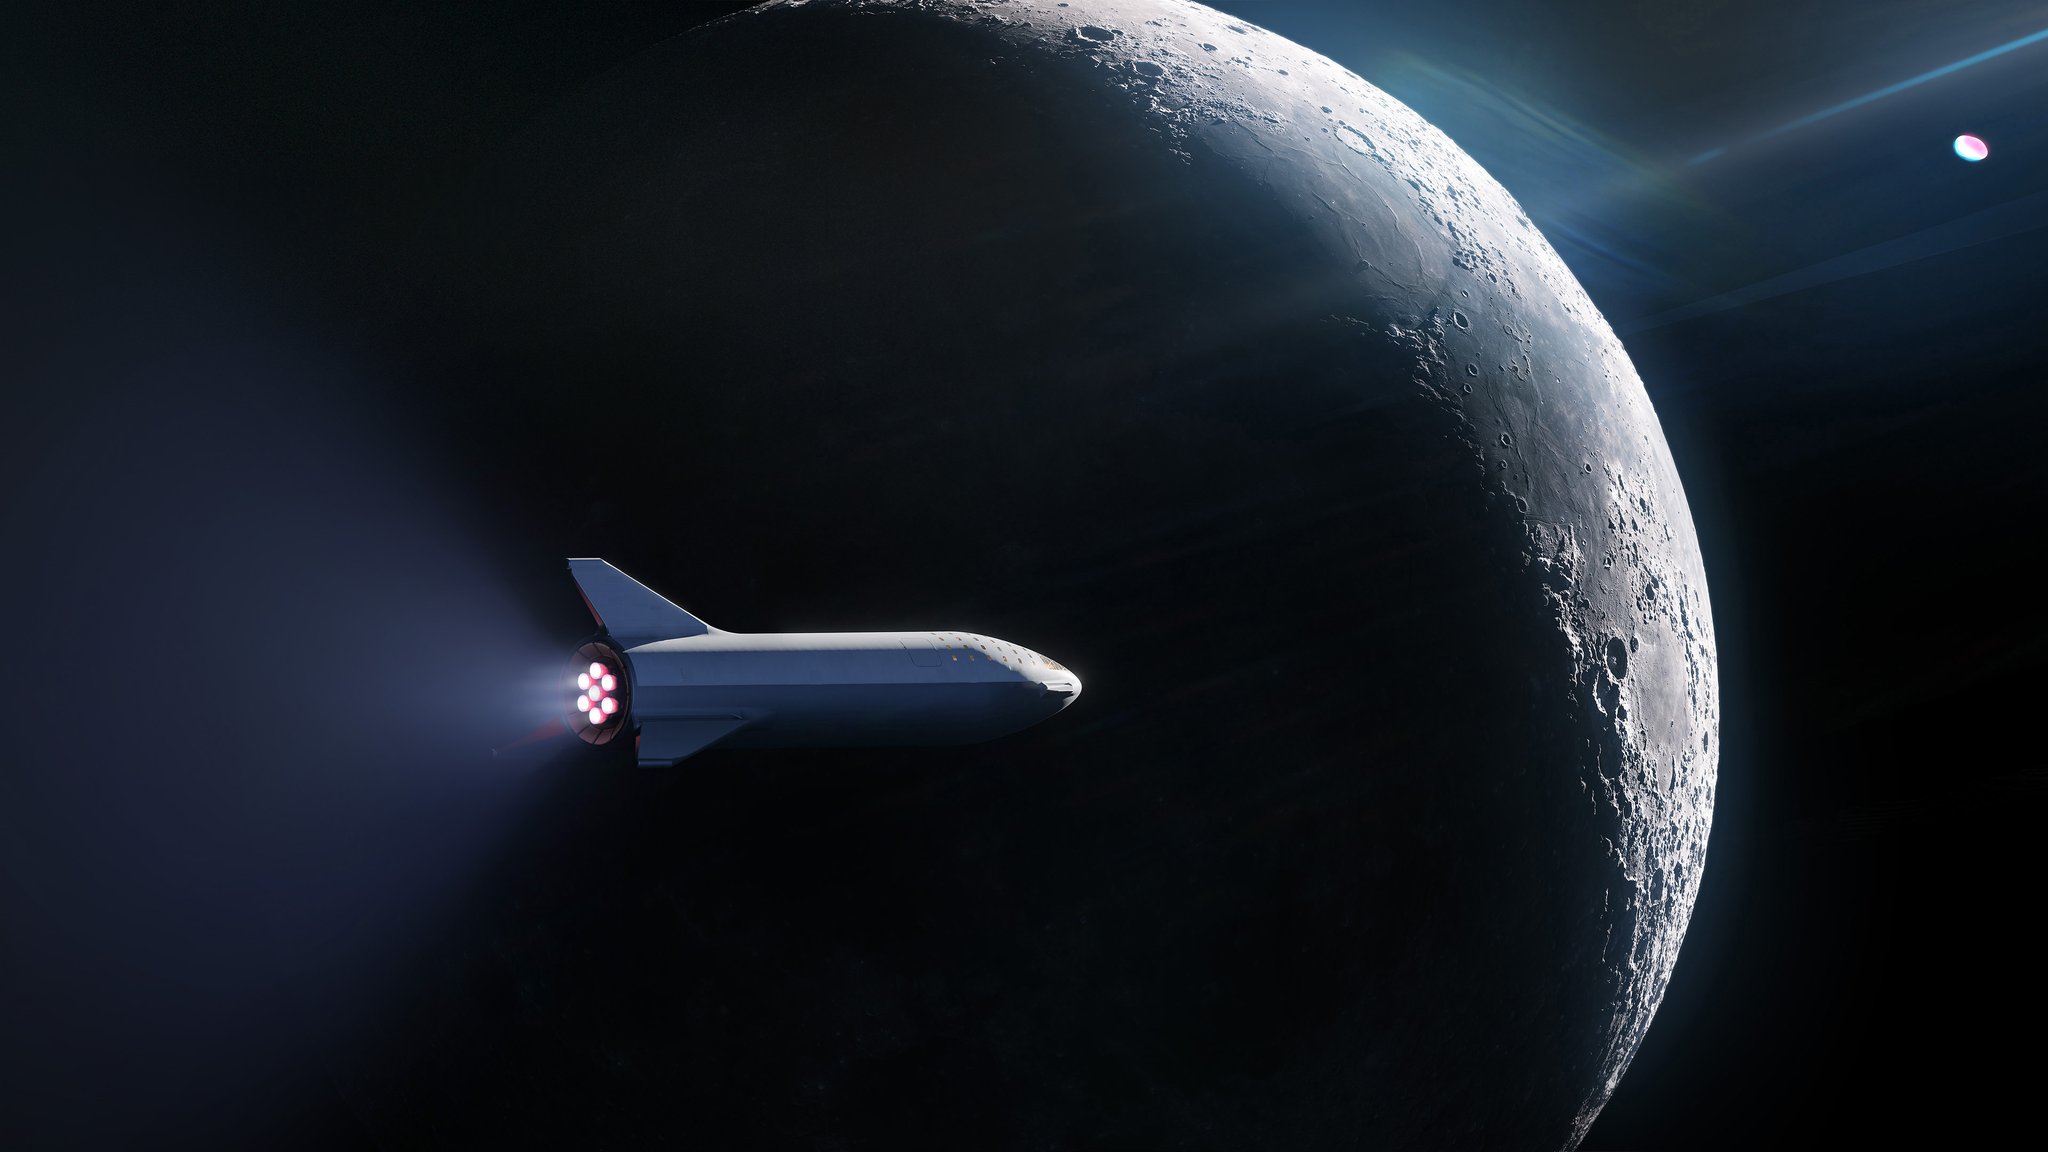 SpaceX has recruited the first private passenger for a trip around the Moon